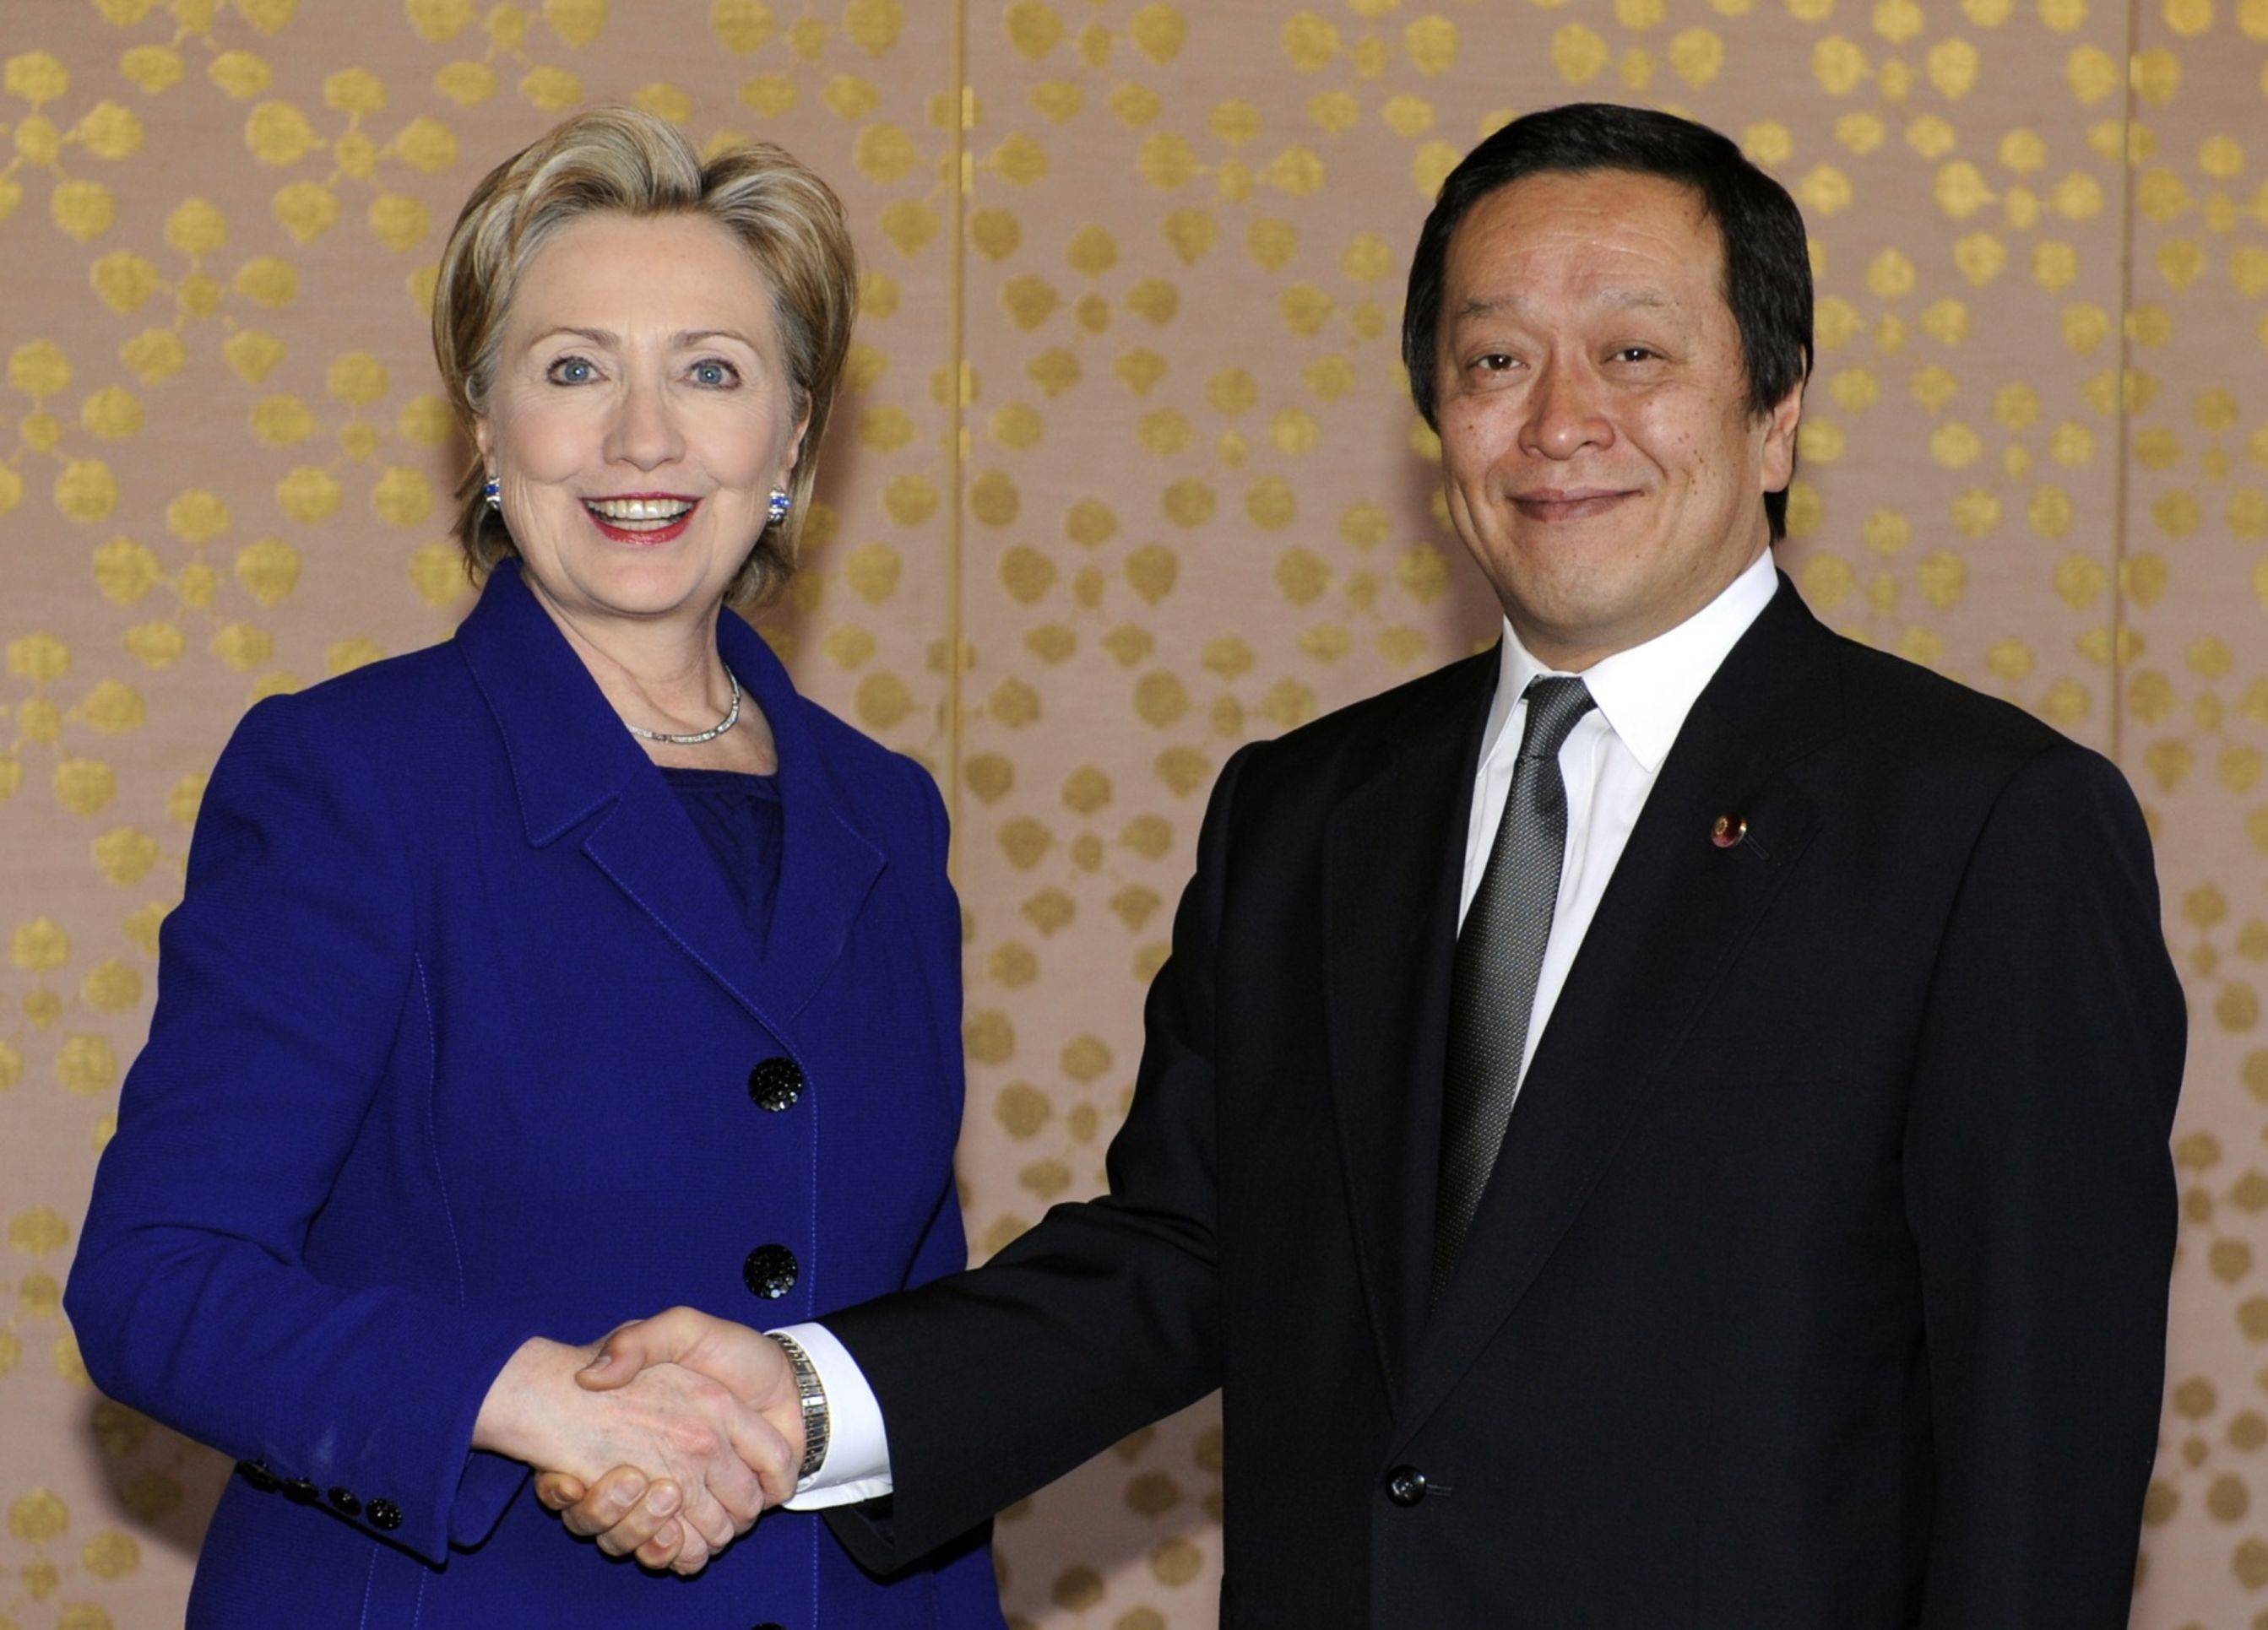 Then-U.S. Secretary of State Hillary Clinton shakes hands with Yasukazu Hamada, Japan's defense minister at the time, prior to their meeting at the Iikura Guest House in Tokyo in February 2009. | POOL / VIA BLOOMBERG